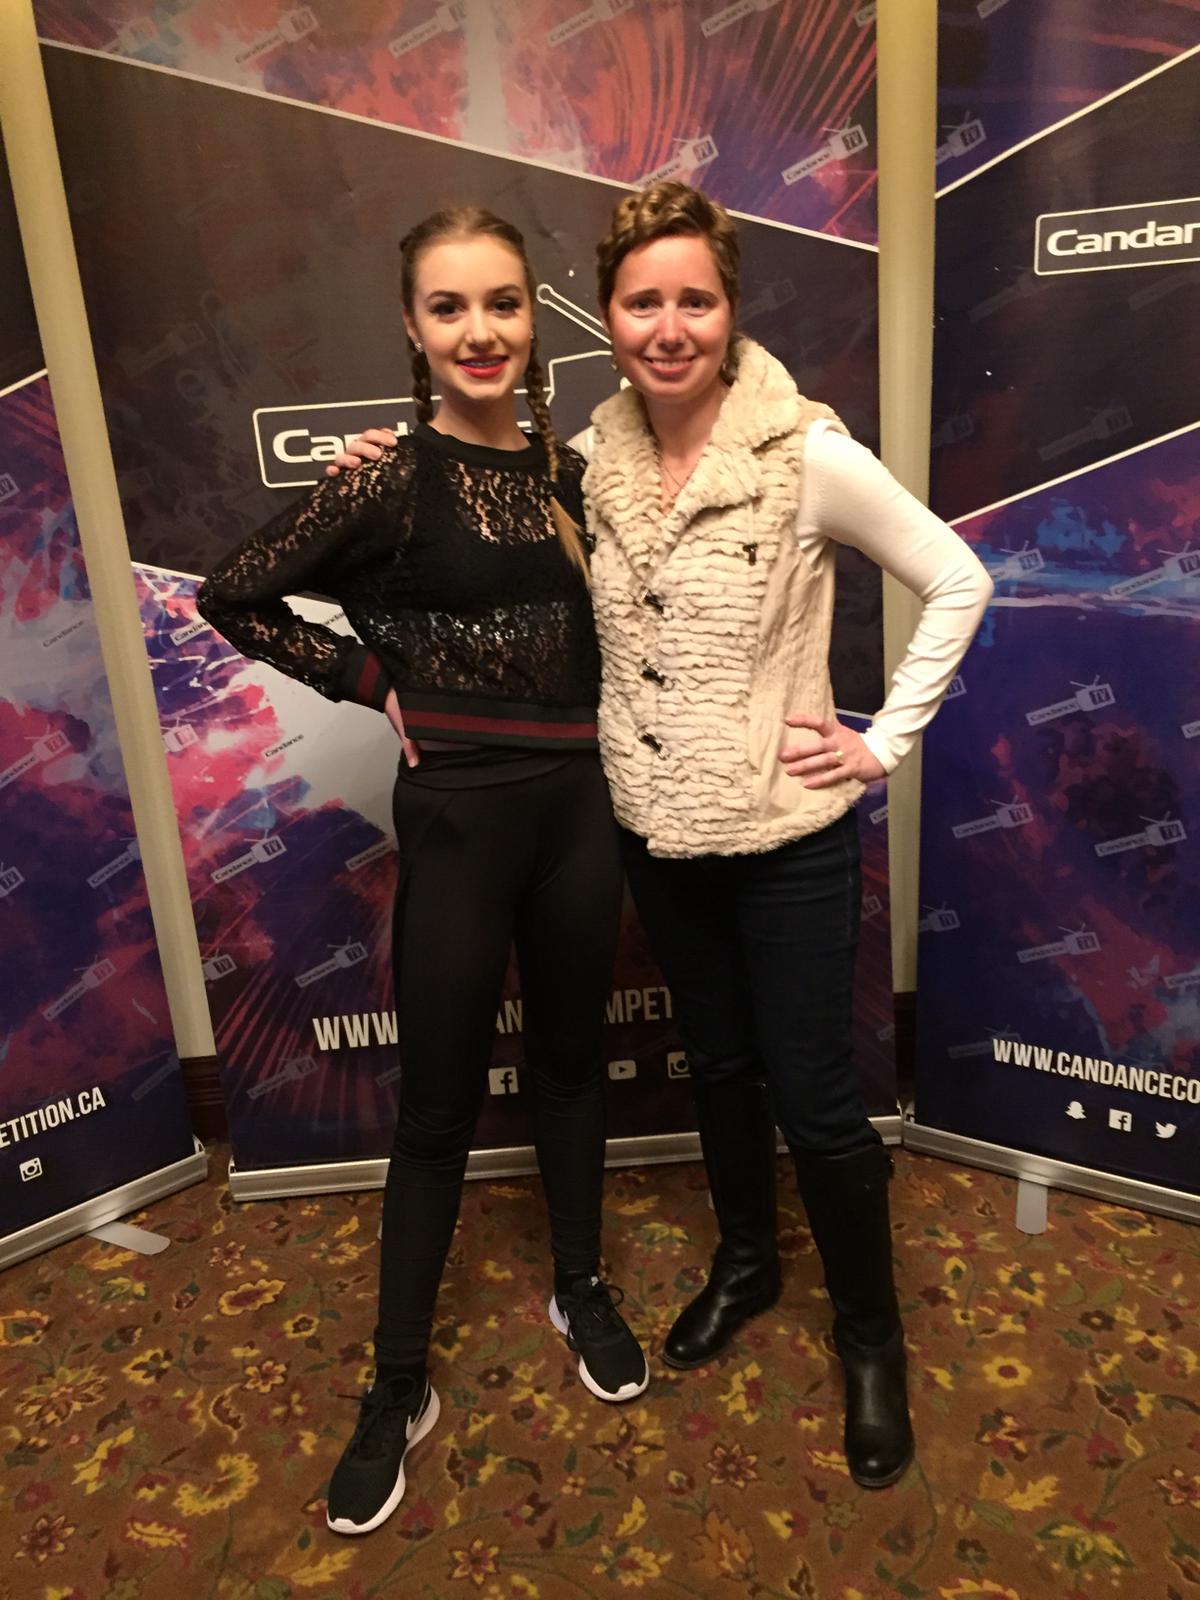 Elena and daughter posing at CandanceCompetition 